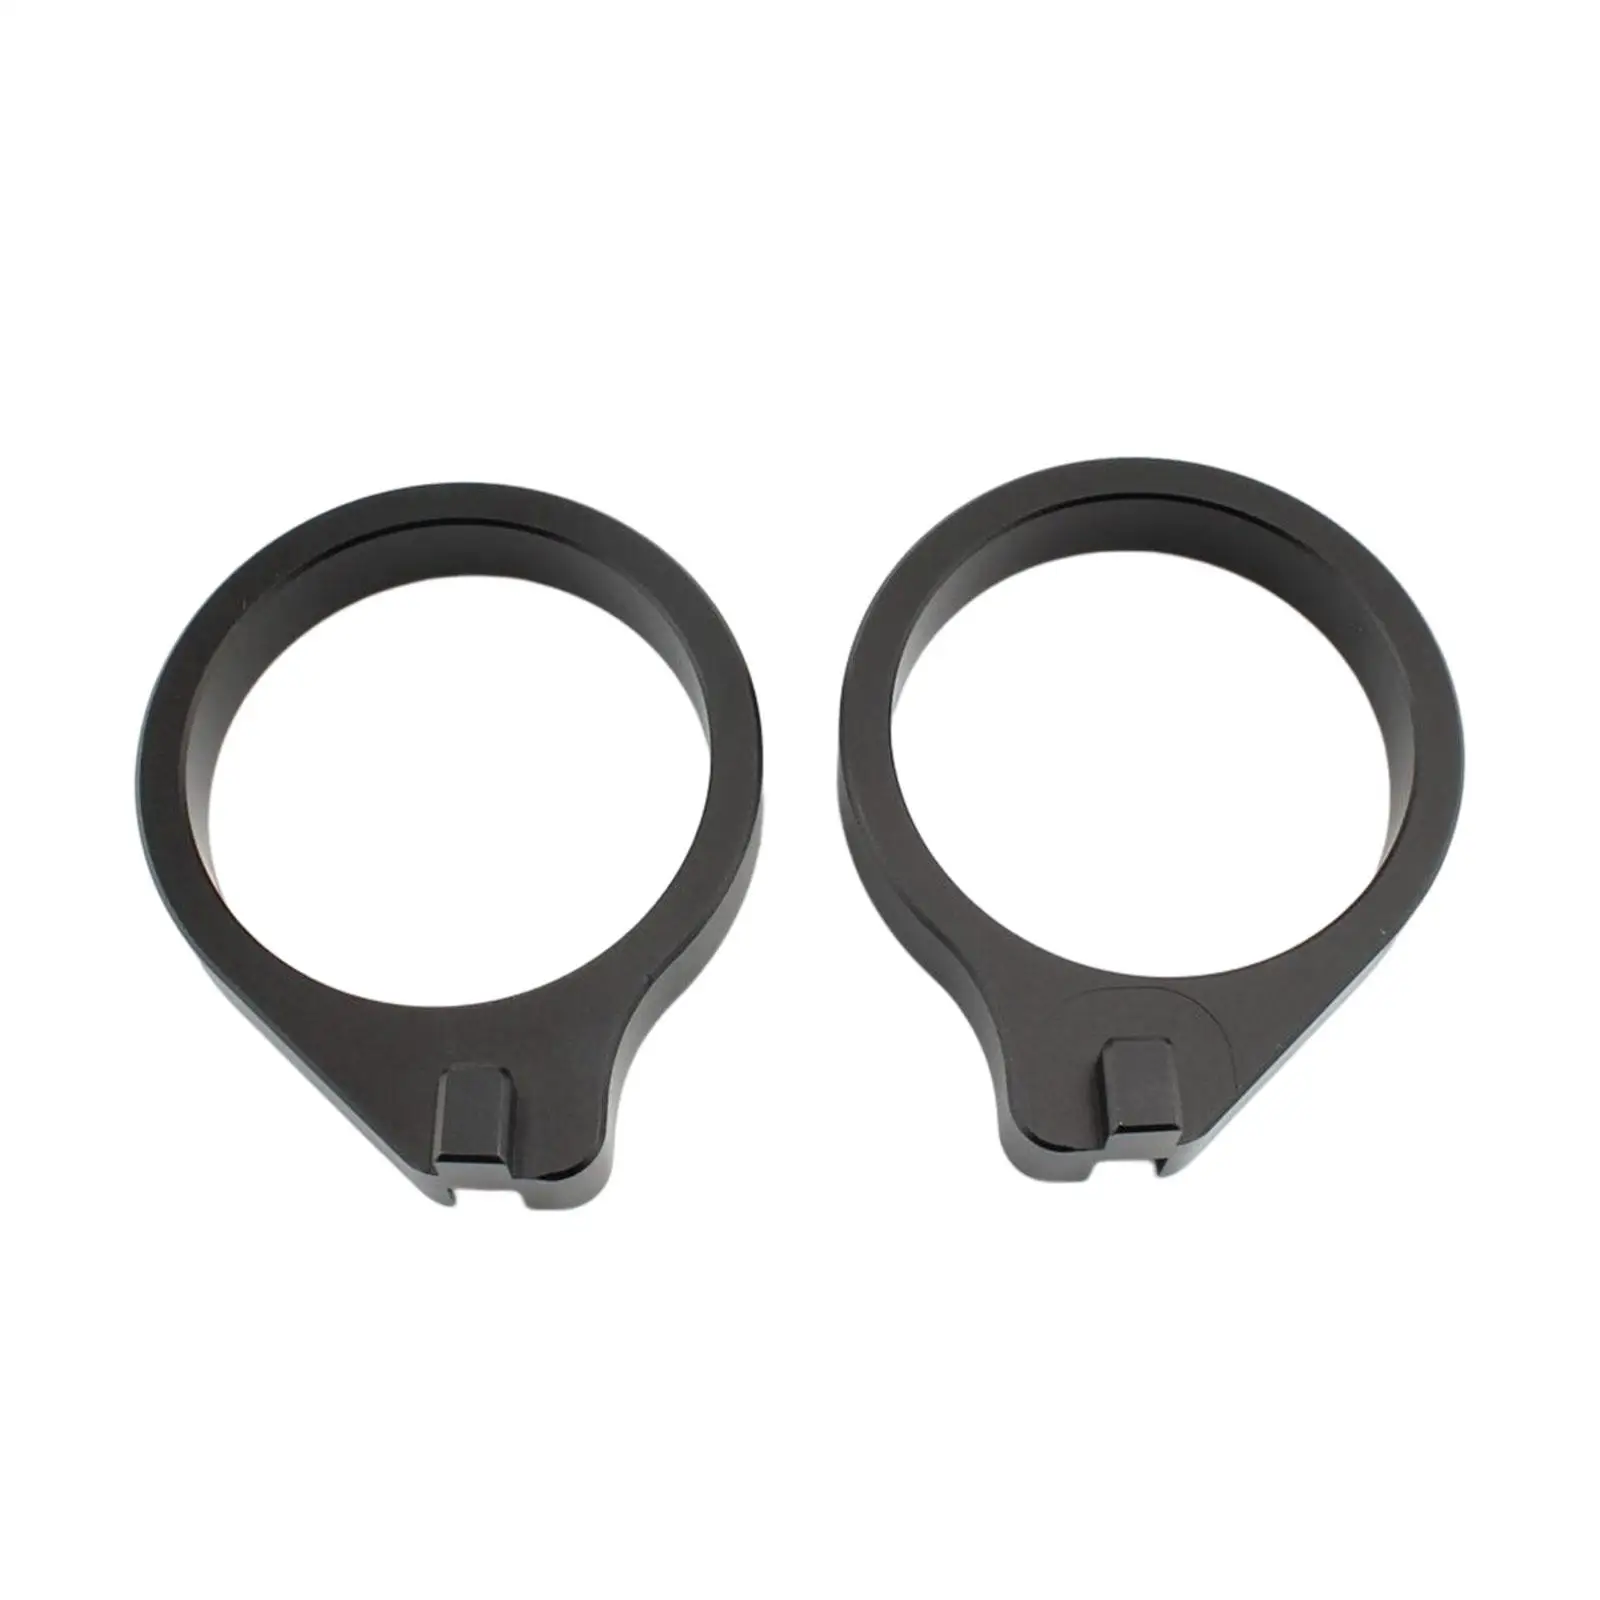 

2 Pieces Handlebar Risers Parts 12mm Heightened Increase Handlebar Height Handle